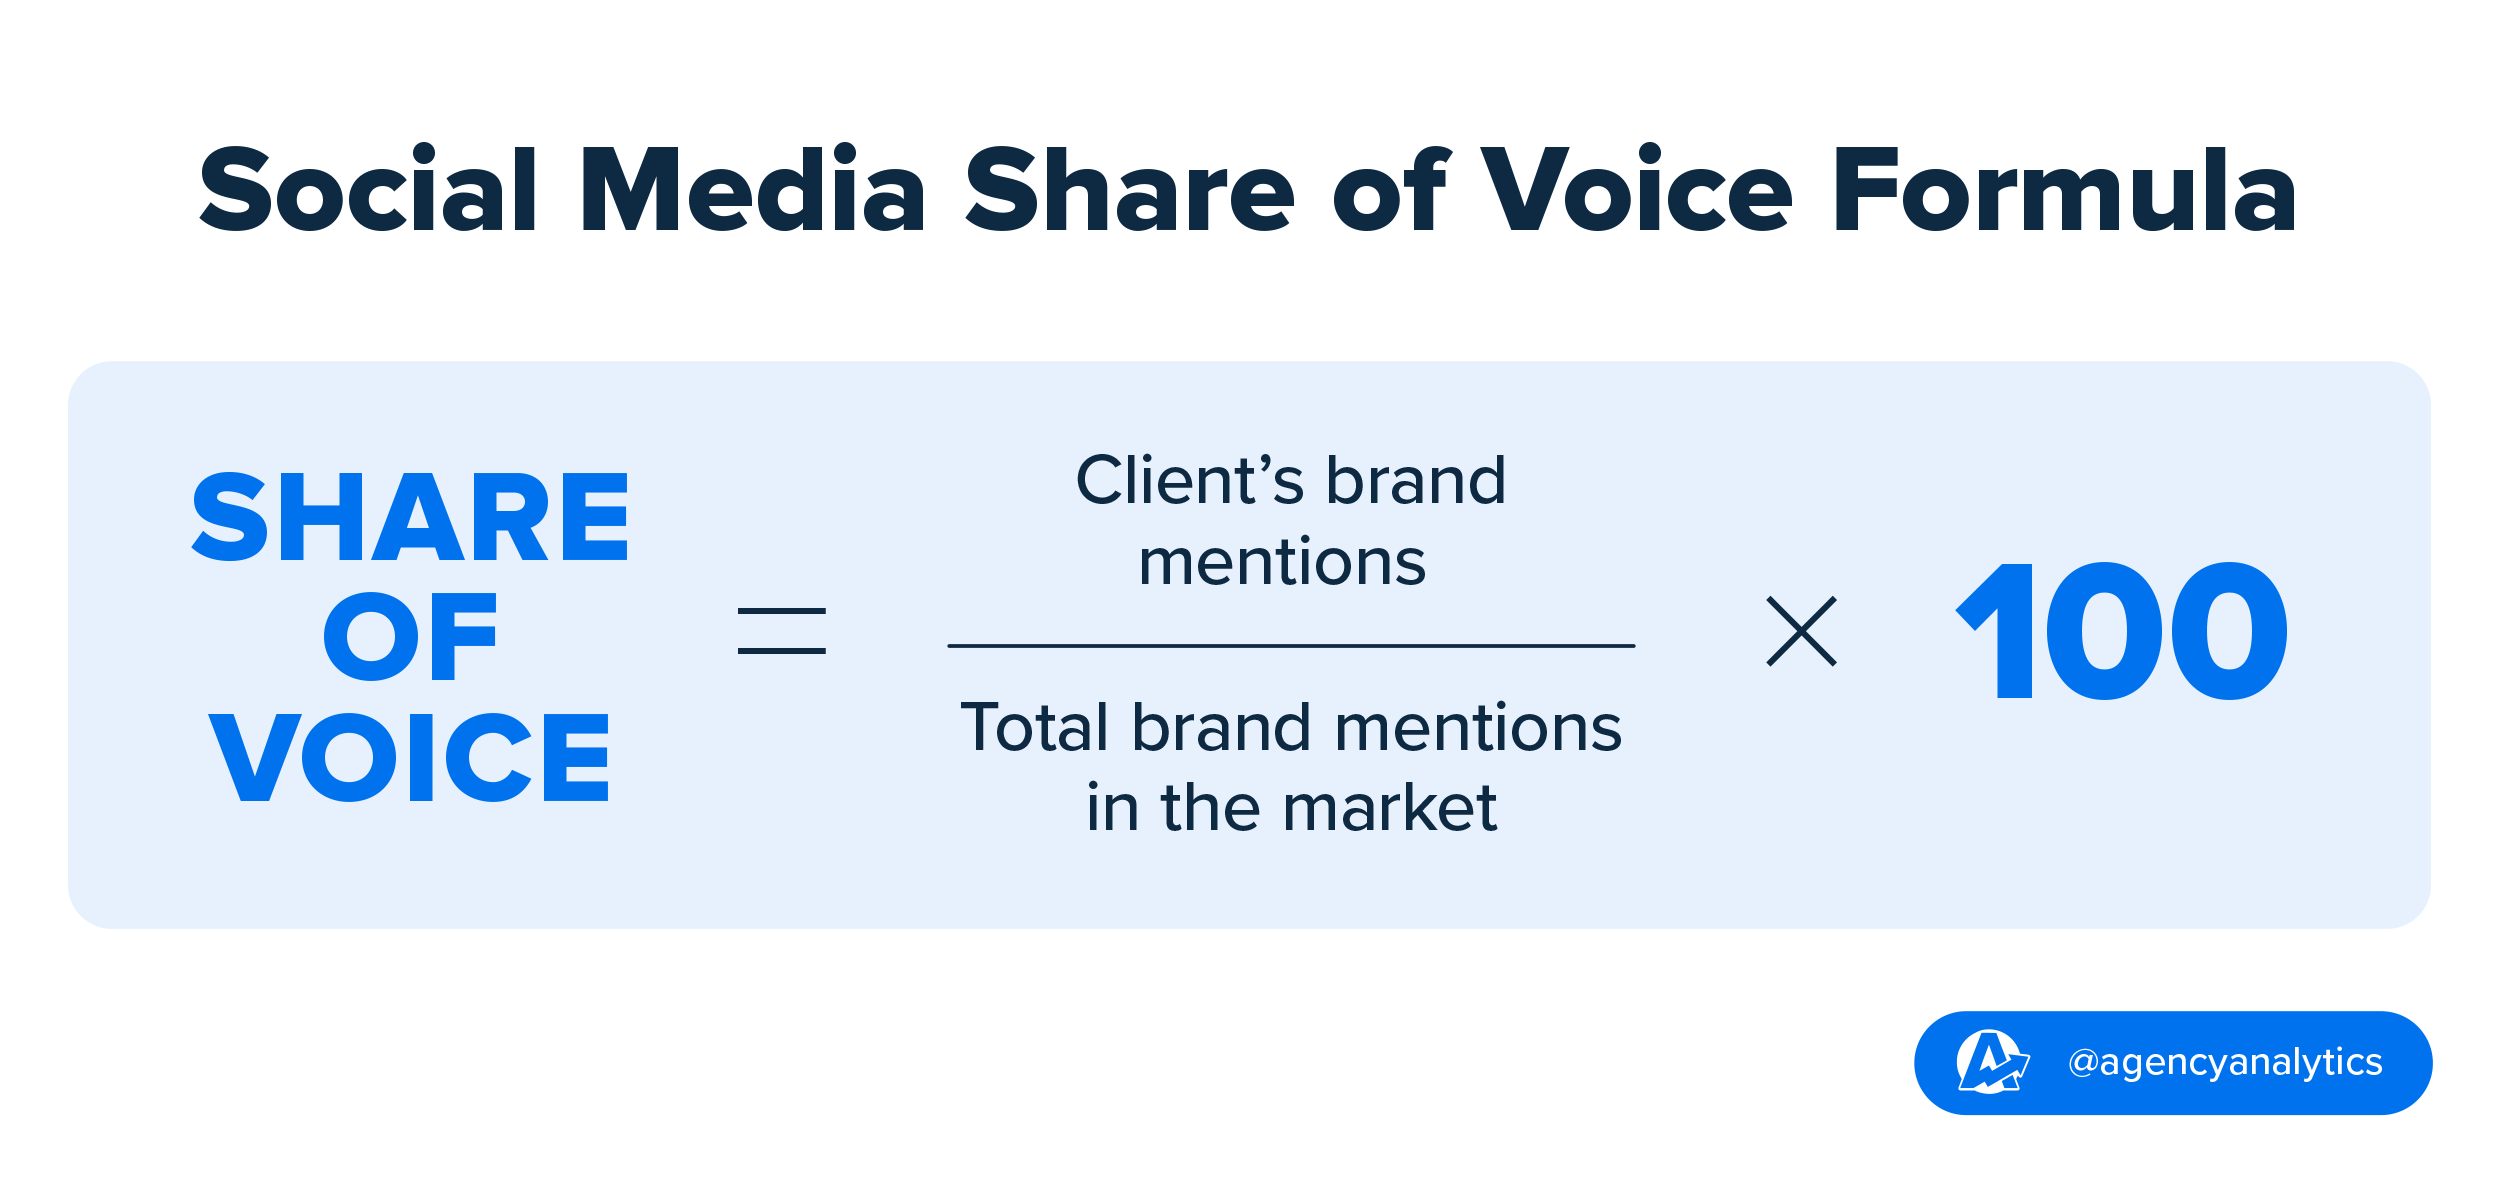 How To Measure and Improve Share of Voice - AgencyAnalytics